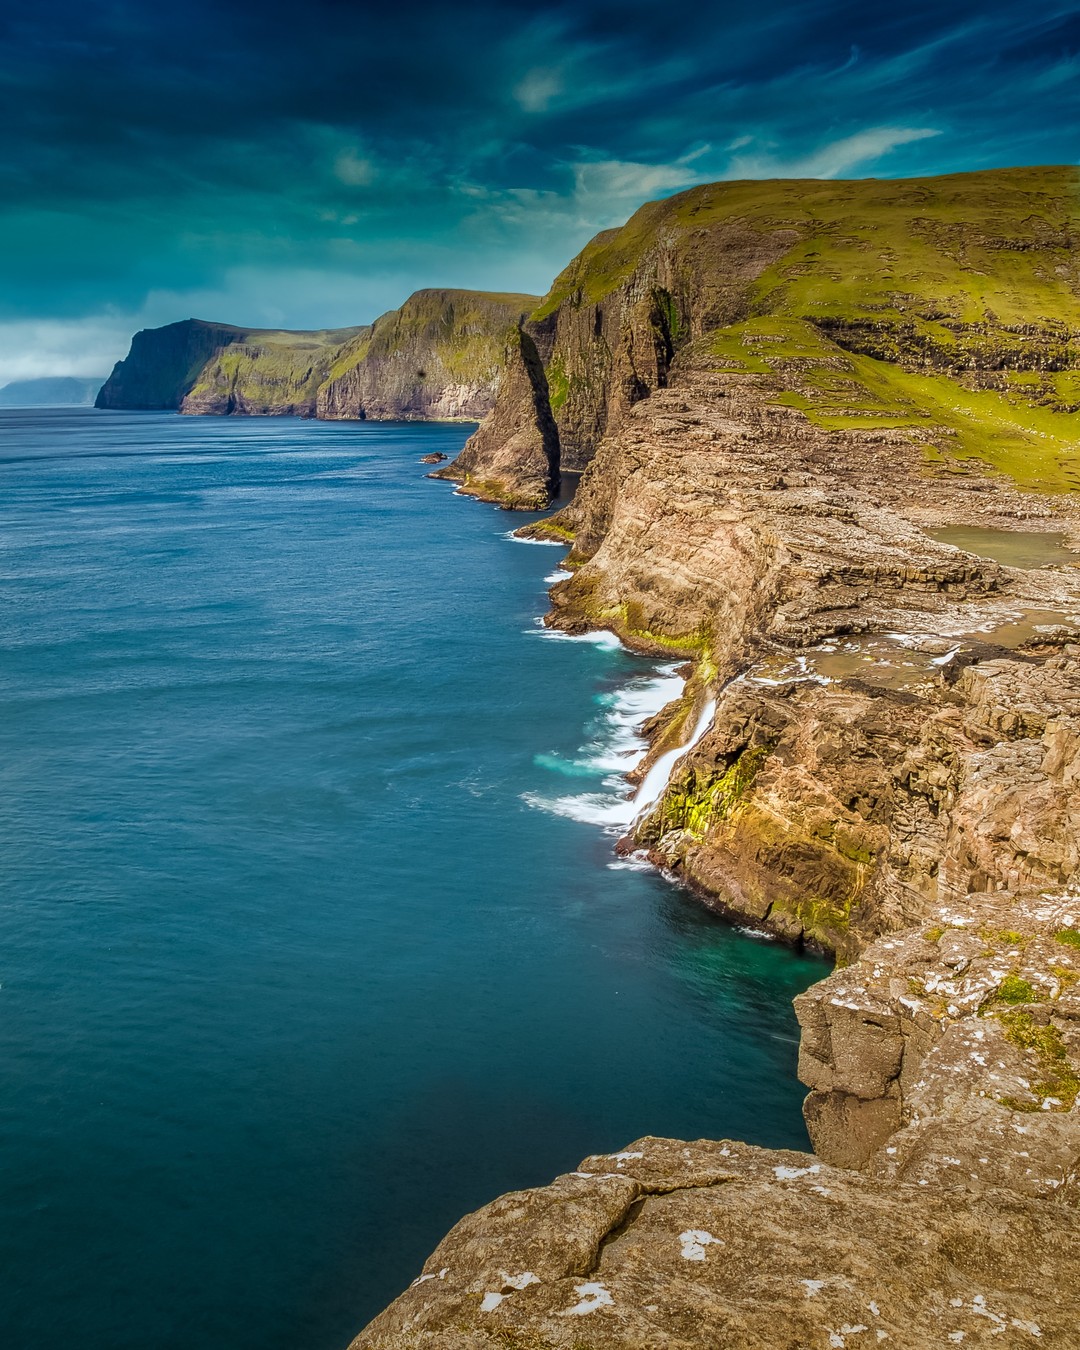 The Faroese coast is never anything but sensational.

One of the most popular hikes in the Faroe Islands is the hike along the shores of Lake Sørvágsvatn. The trail takes in a number of impressive viewpoints en route to Bøsdalafossur waterfall – where Sørvágsvatn drains into the Atlantic Ocean – and the distinctive sea stack of Geitisskoradrangur. 
-⠀⠀⠀⠀
-⠀⠀⠀⠀
-⠀⠀⠀⠀
-⠀⠀⠀⠀
-⠀⠀⠀⠀
-⠀⠀
#Geitisskoradrangur #Sørvágsvatn #SørvágsvatnLake #LakeSørvágsvatn #visitfaroeislands #atlanticairways #faroes #faroe #Bøsdalafossur #trælanípa #vagar #leitisvatn @visitfaroeislands